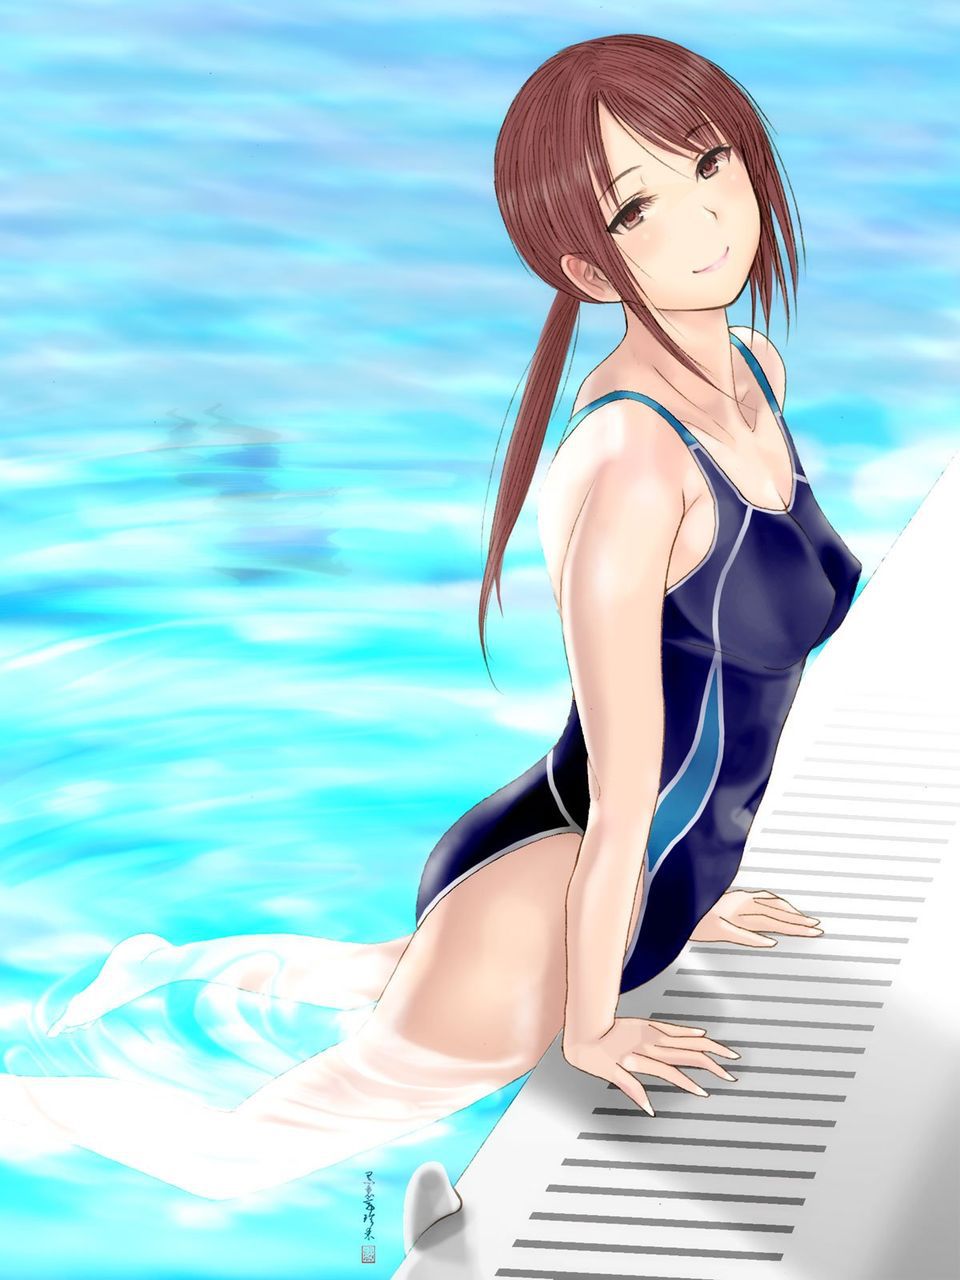 It comes more than a usual swimsuit! Second erotic image of the girl in the swimsuit wwww Part 5 40